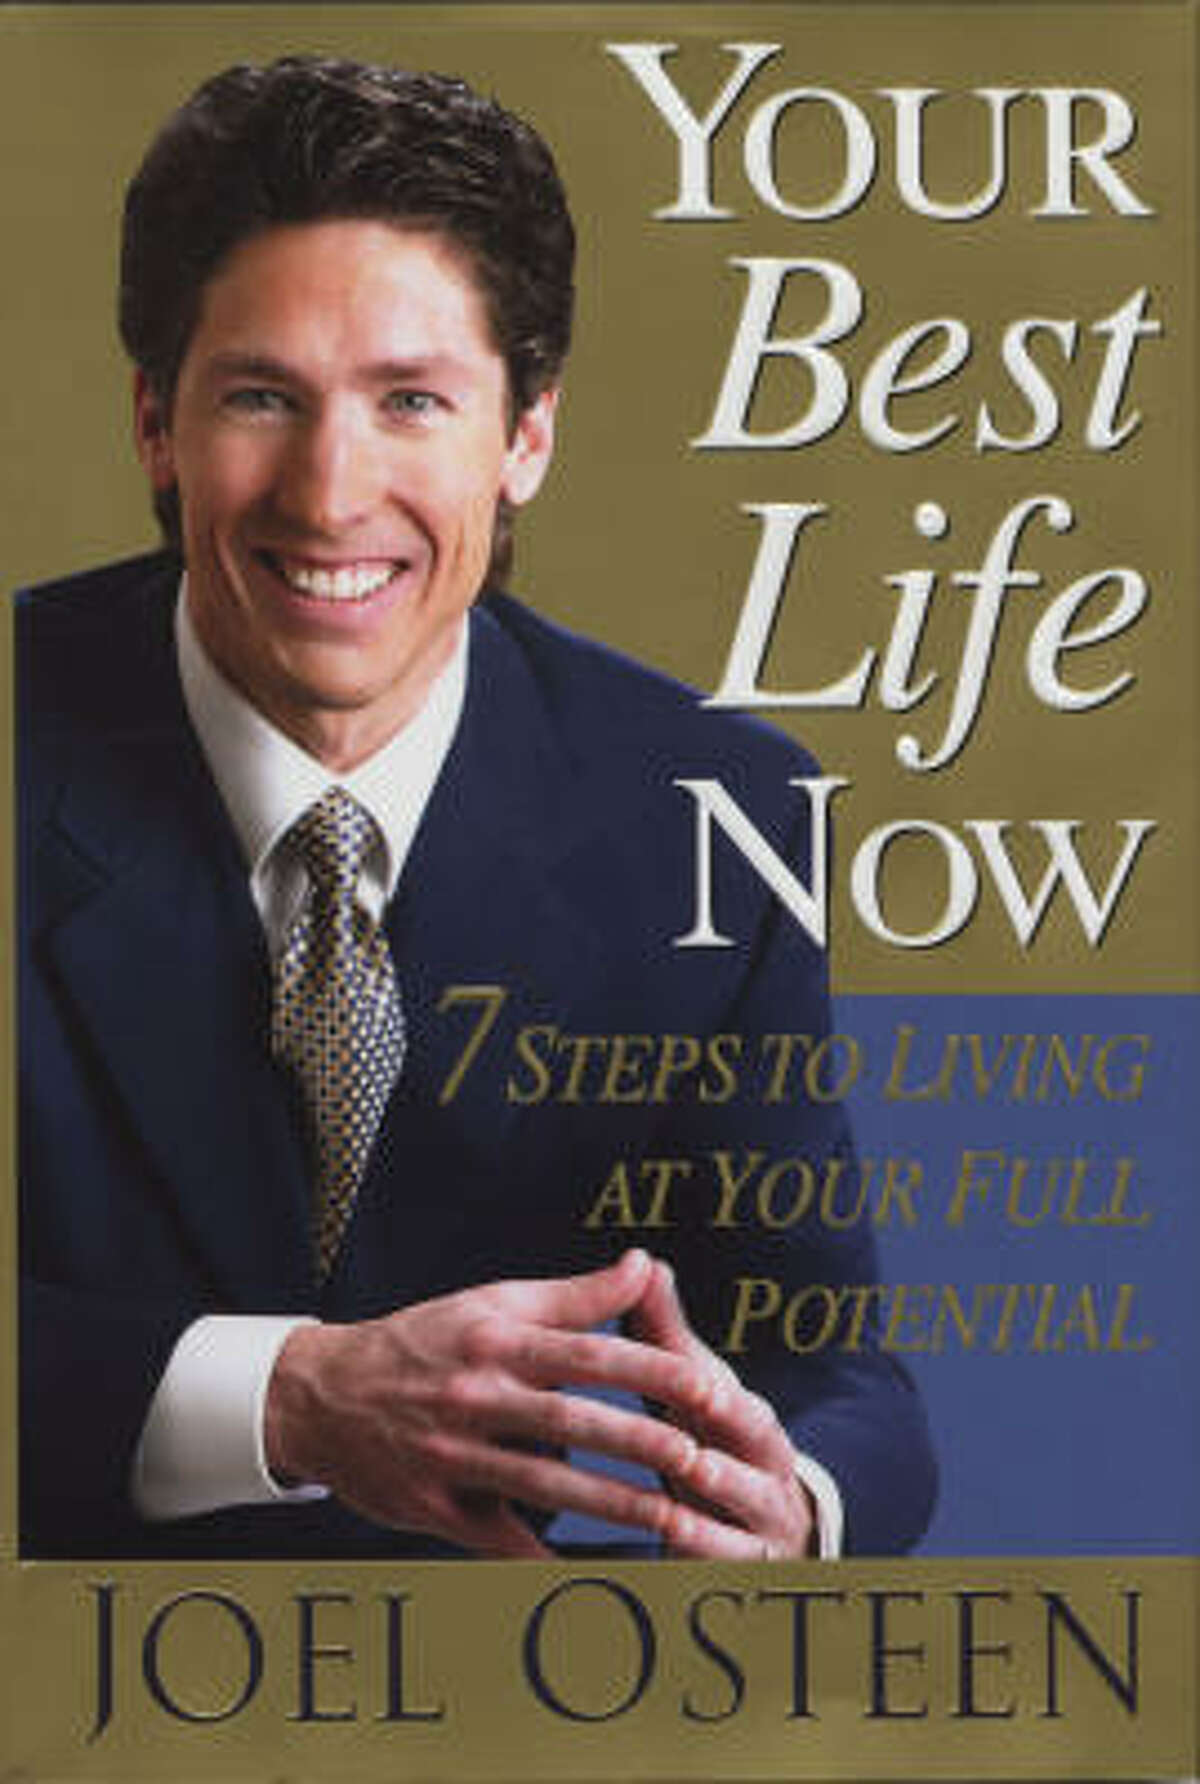 daily readings from your best life now joel osteen